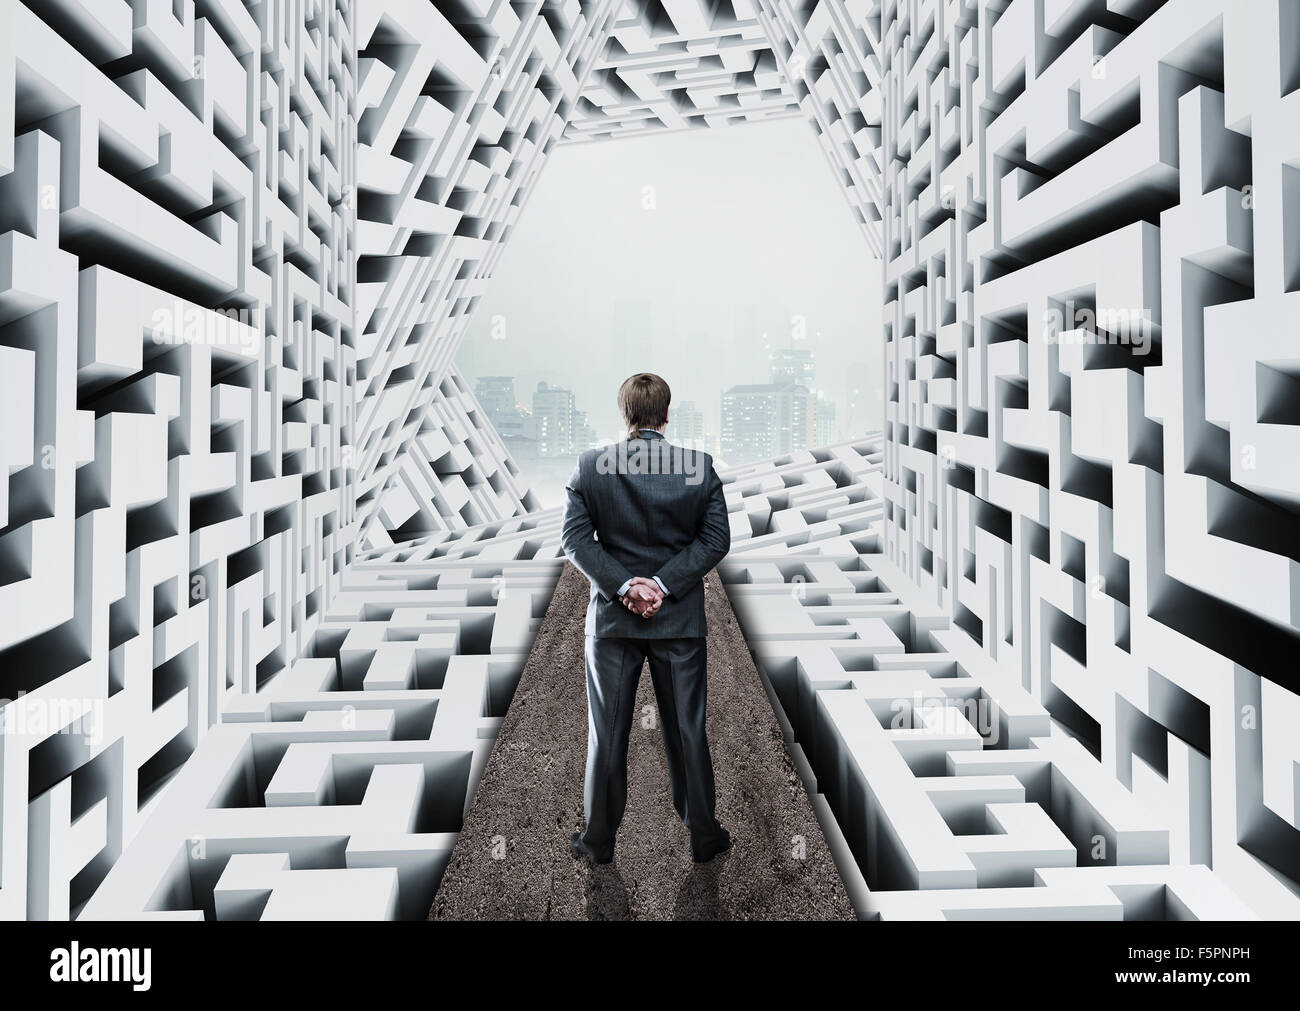 Businessman standing in abstract labyrinth Banque D'Images